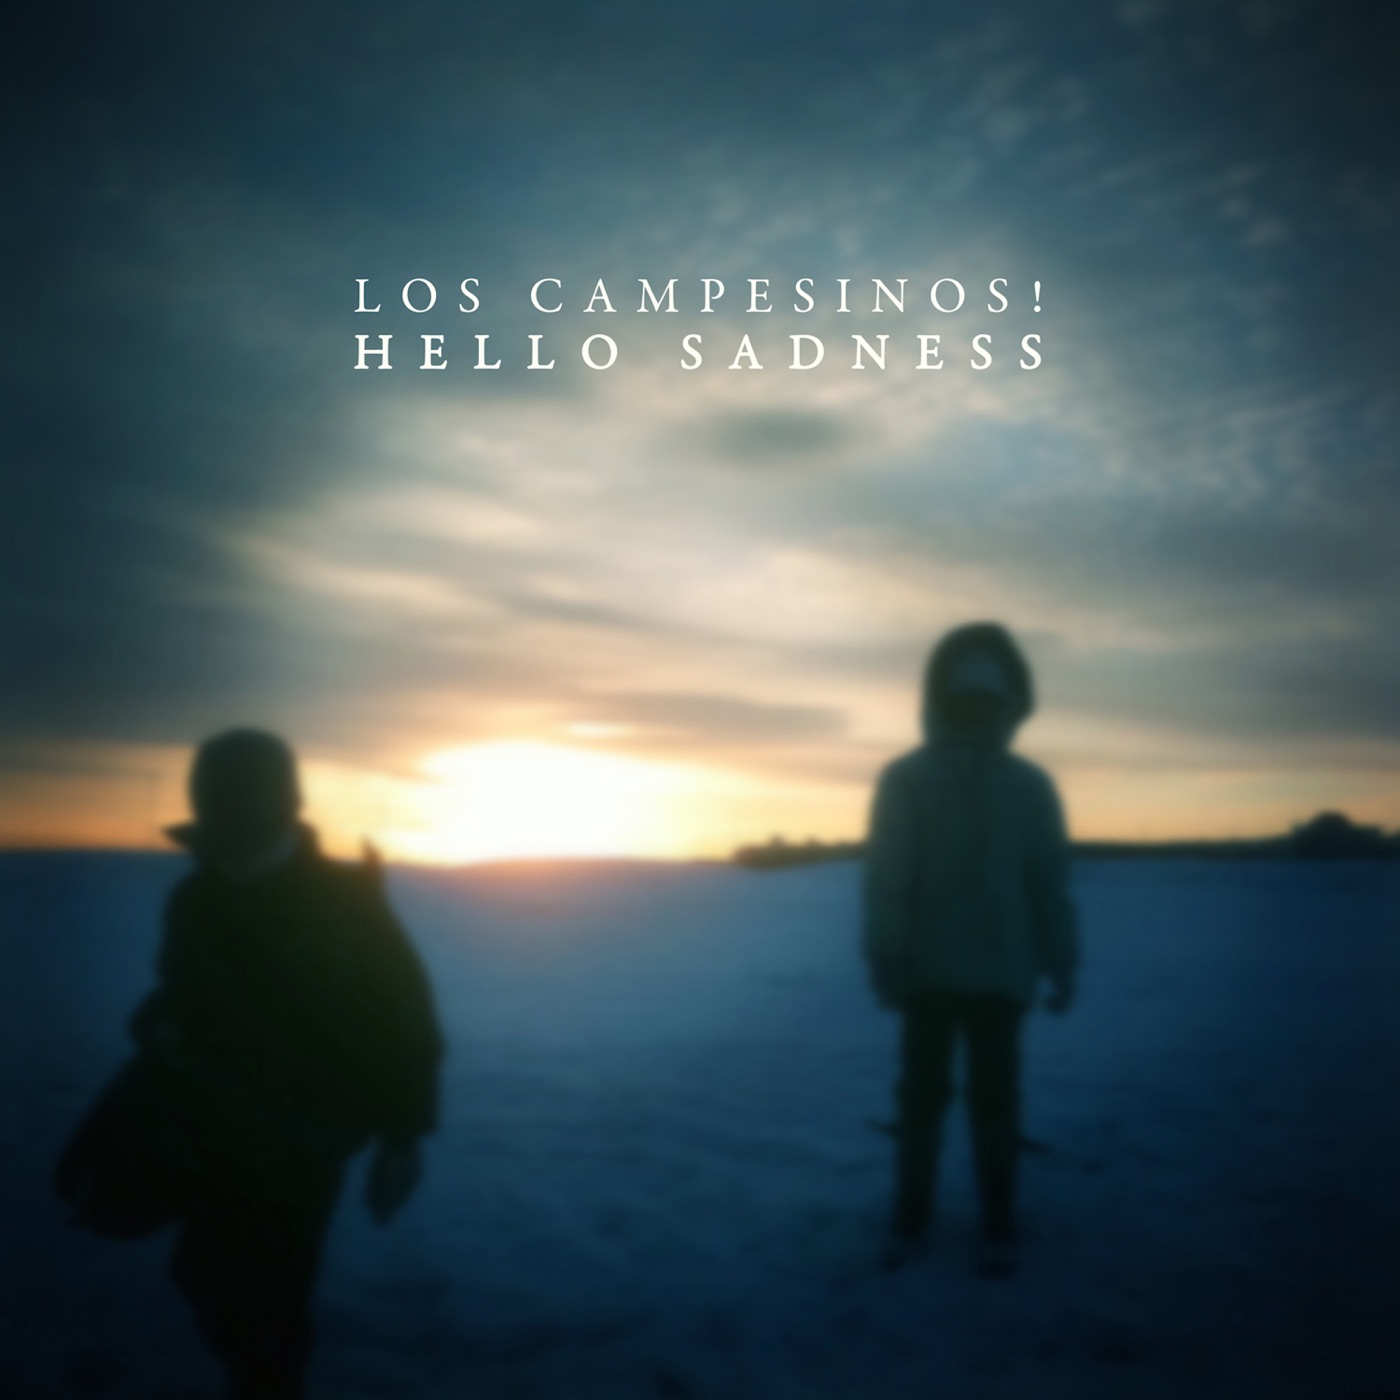 By Your Hand by Los Campesinos!